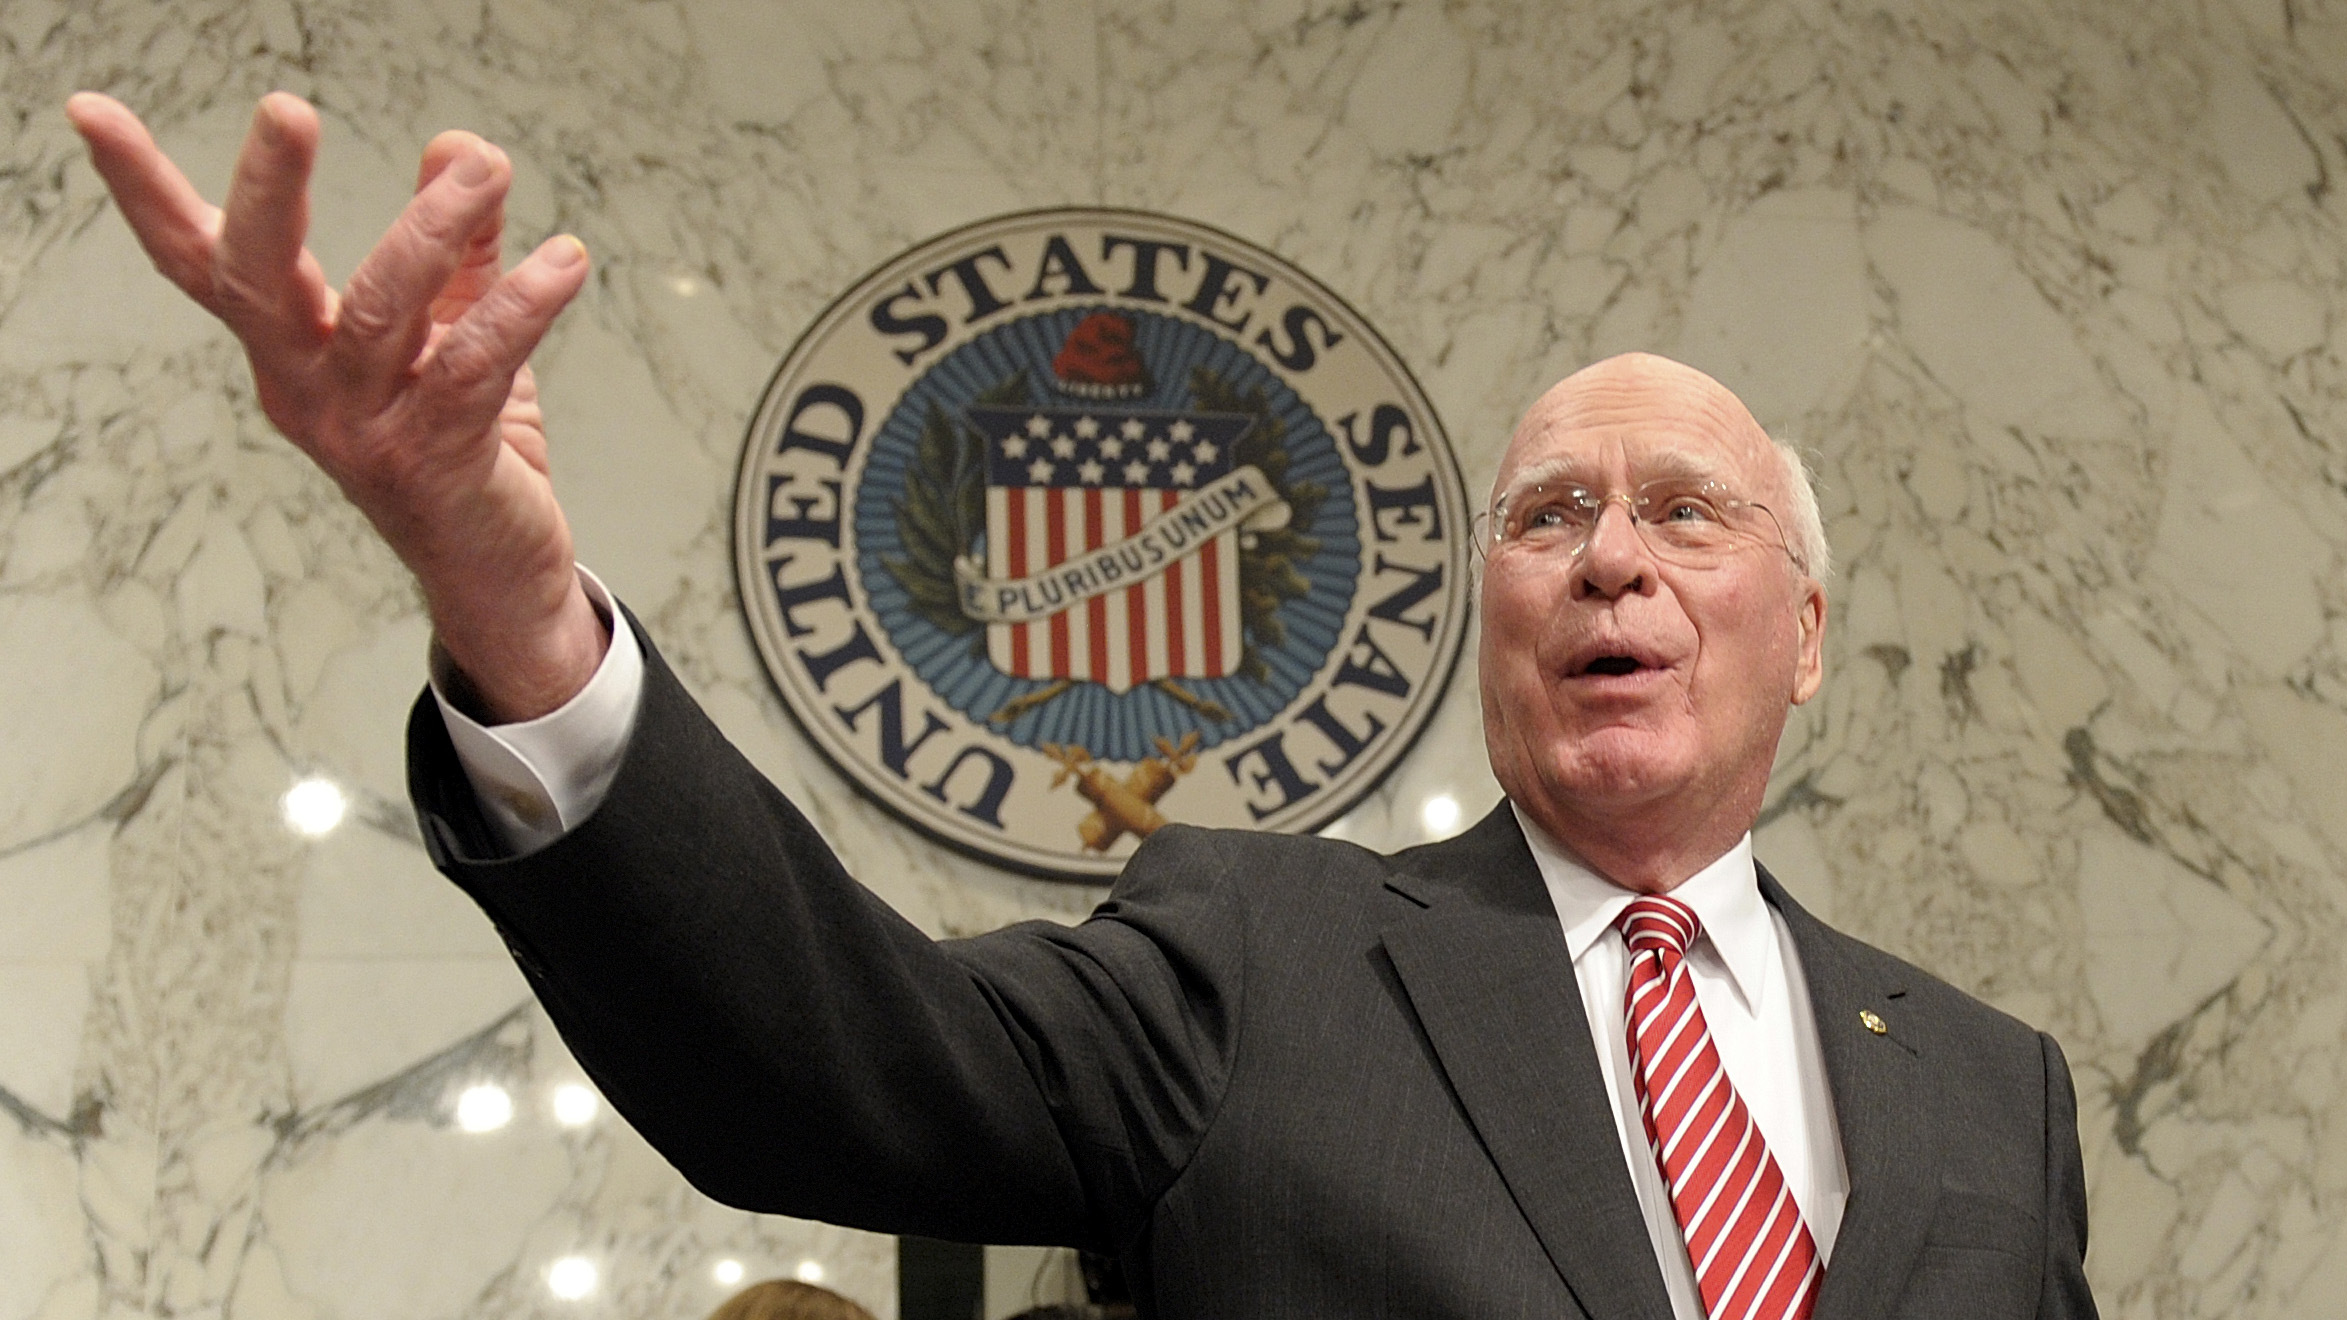 Patrick Leahy's quote #3